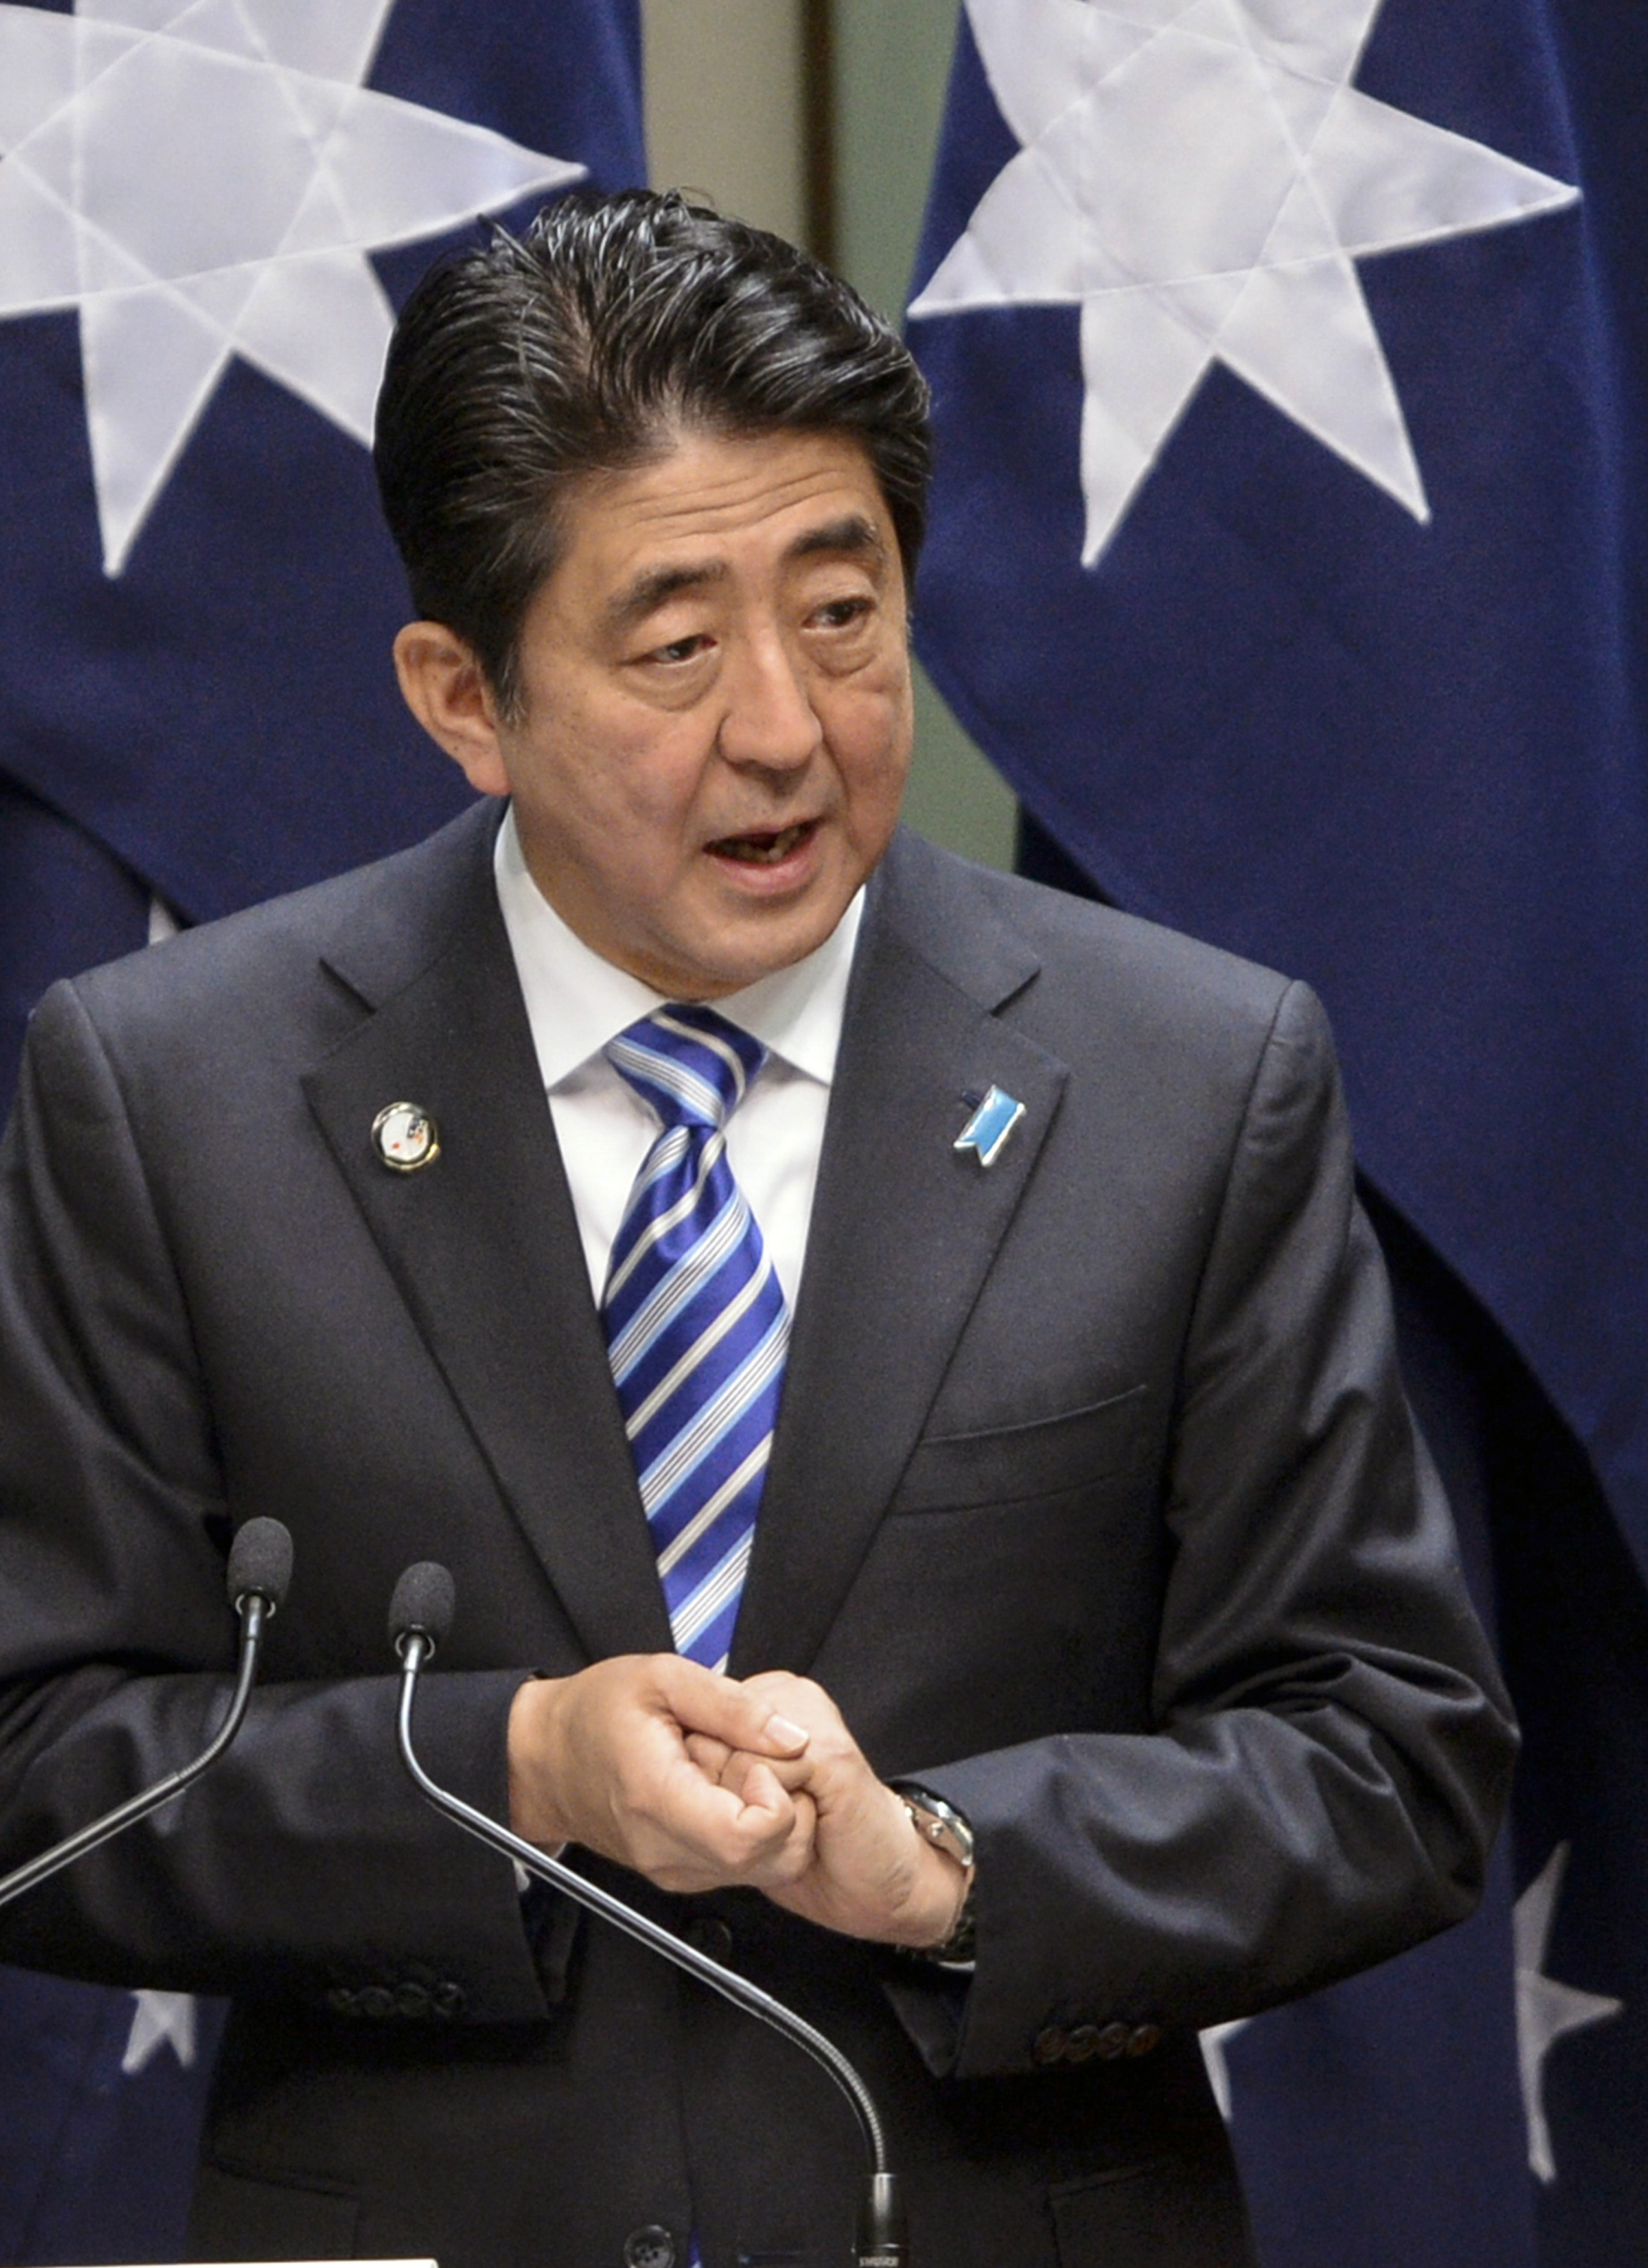 Japan's PM Abe delivers an address to both houses of parliament in Australia's House of Representatives chamber at Parliament House in Canberra